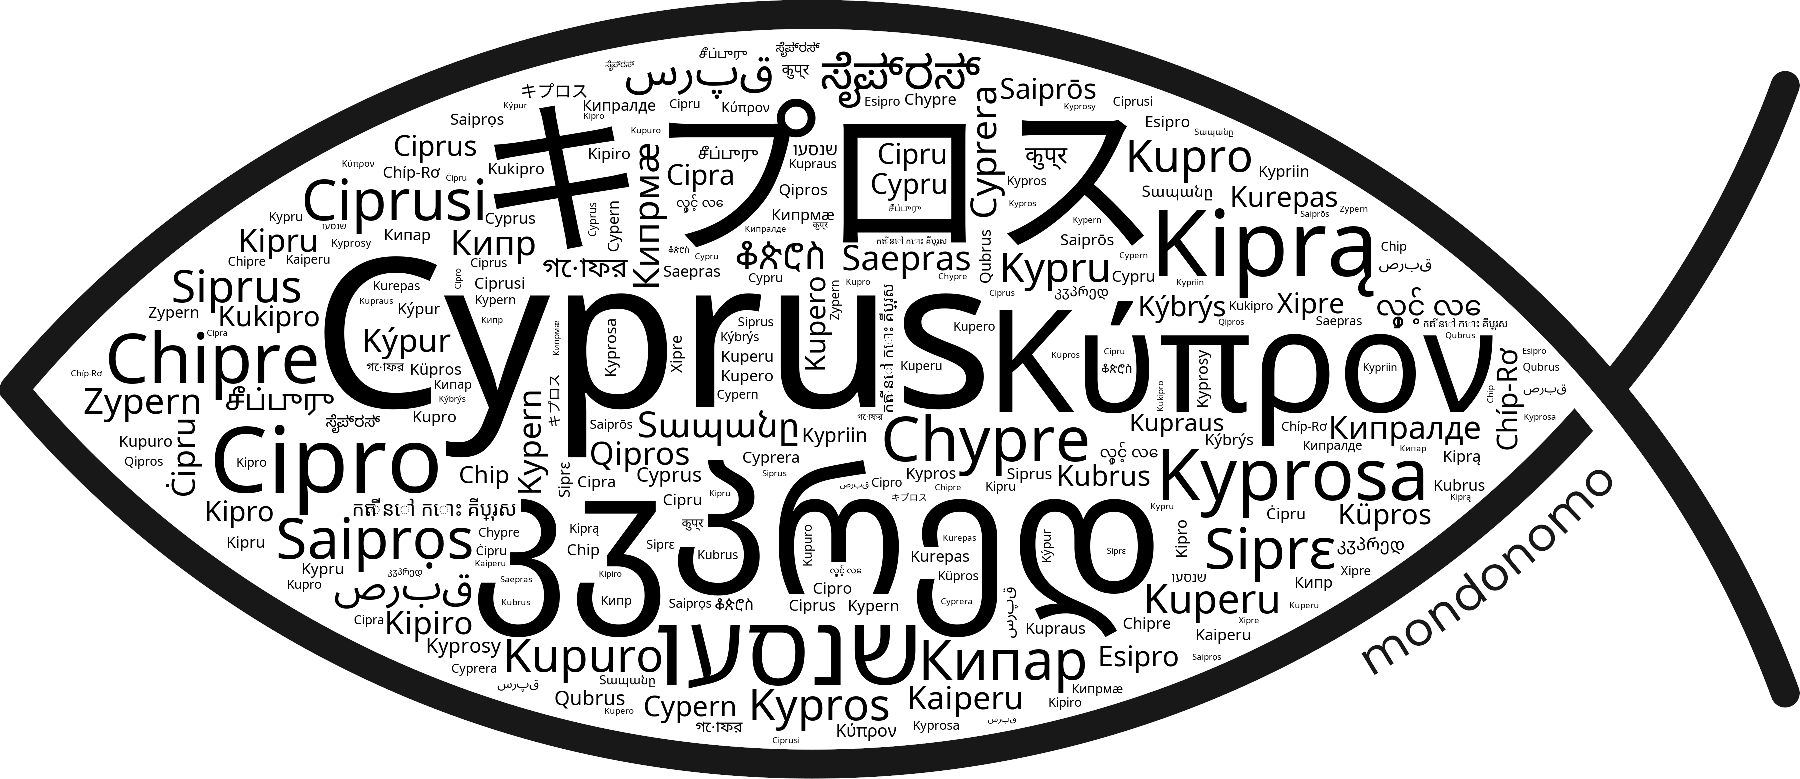 Name Cyprus in the world's Bibles